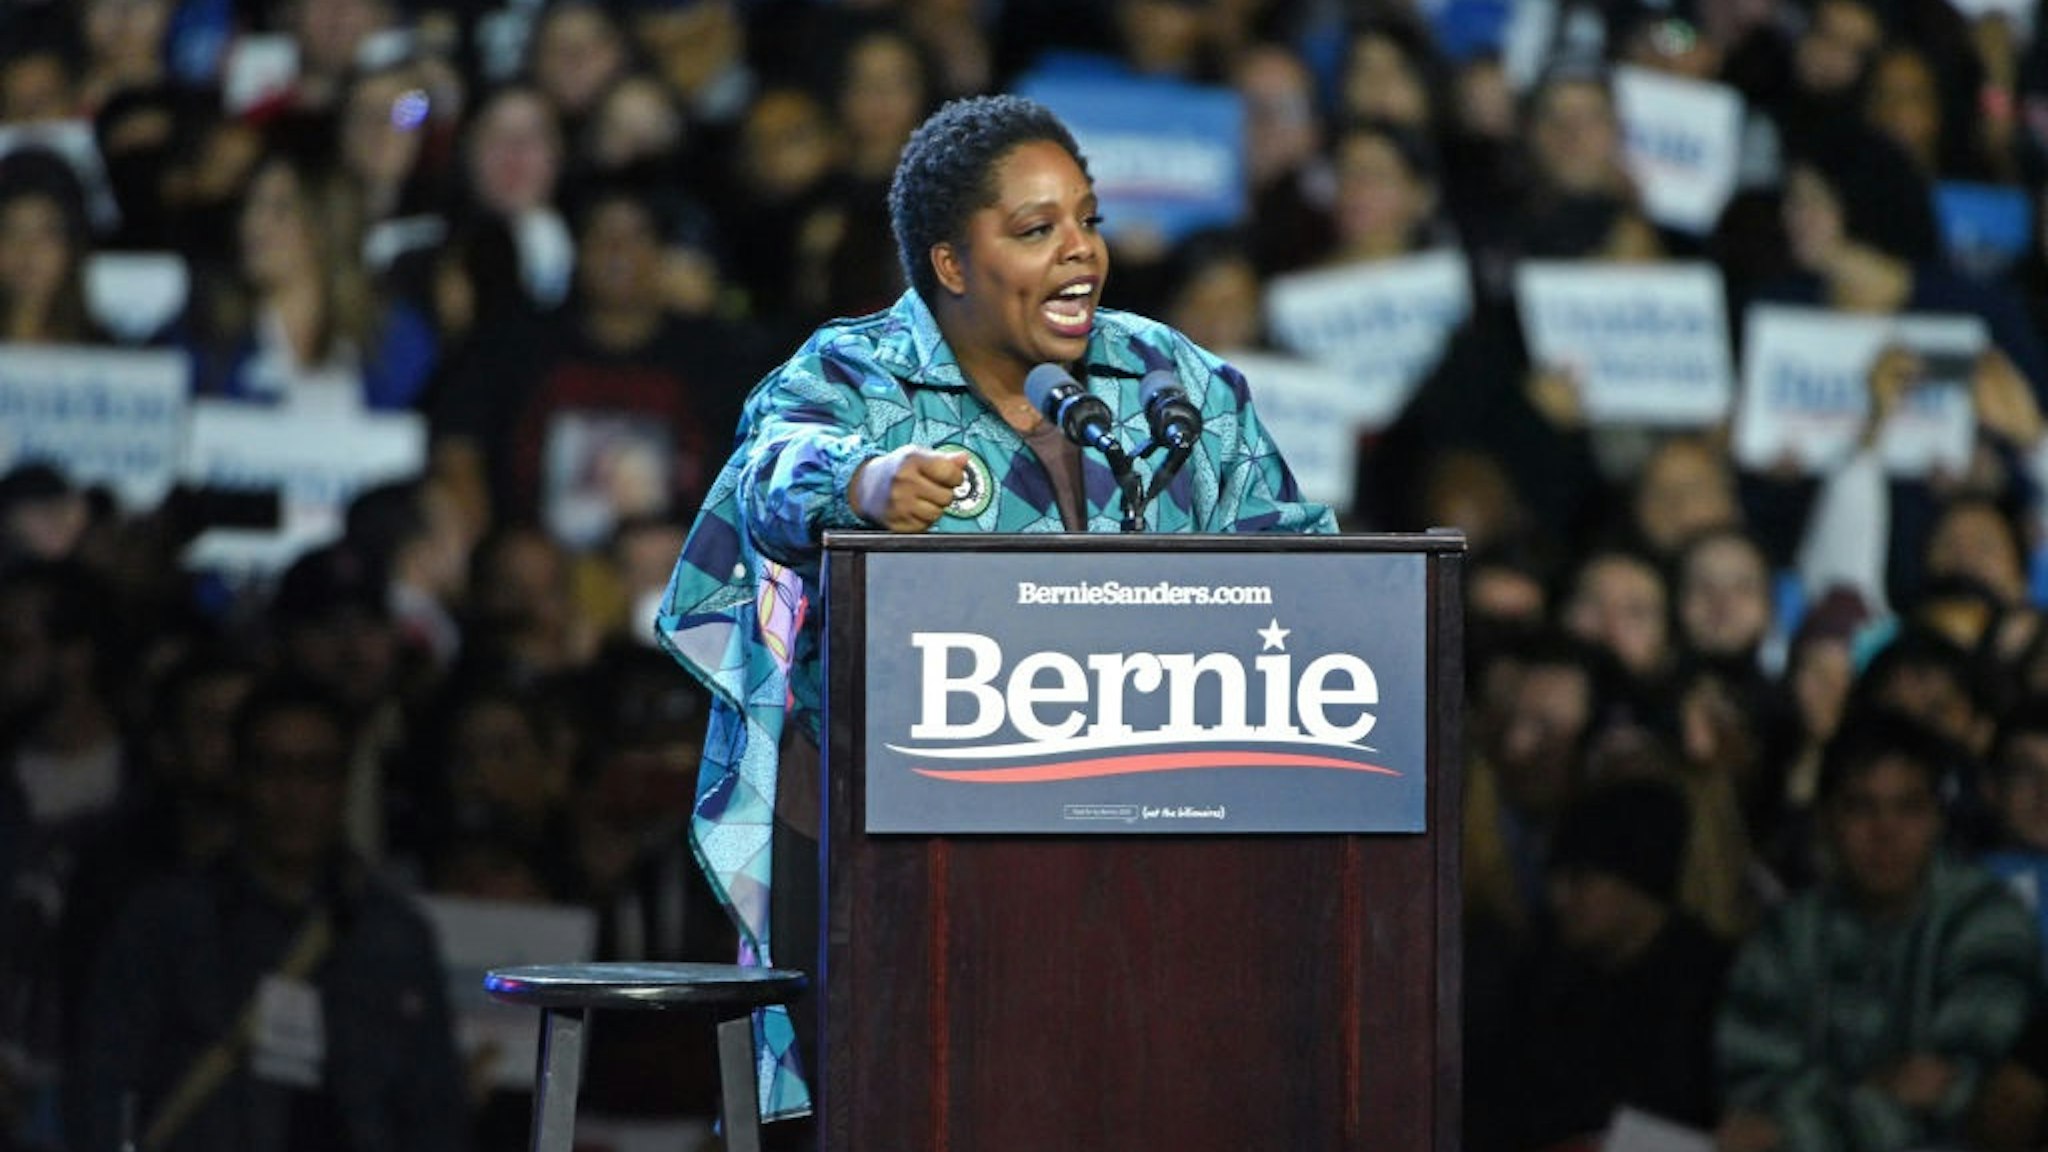 LOS ANGELES, CALIFORNIA - MARCH 01: Black Lives Matter co-founder Patrisse Cullors speaks at a Bernie Sanders 2020 presidential campaign rally at Los Angeles Convention Center on March 01, 2020 in Los Angeles, California.